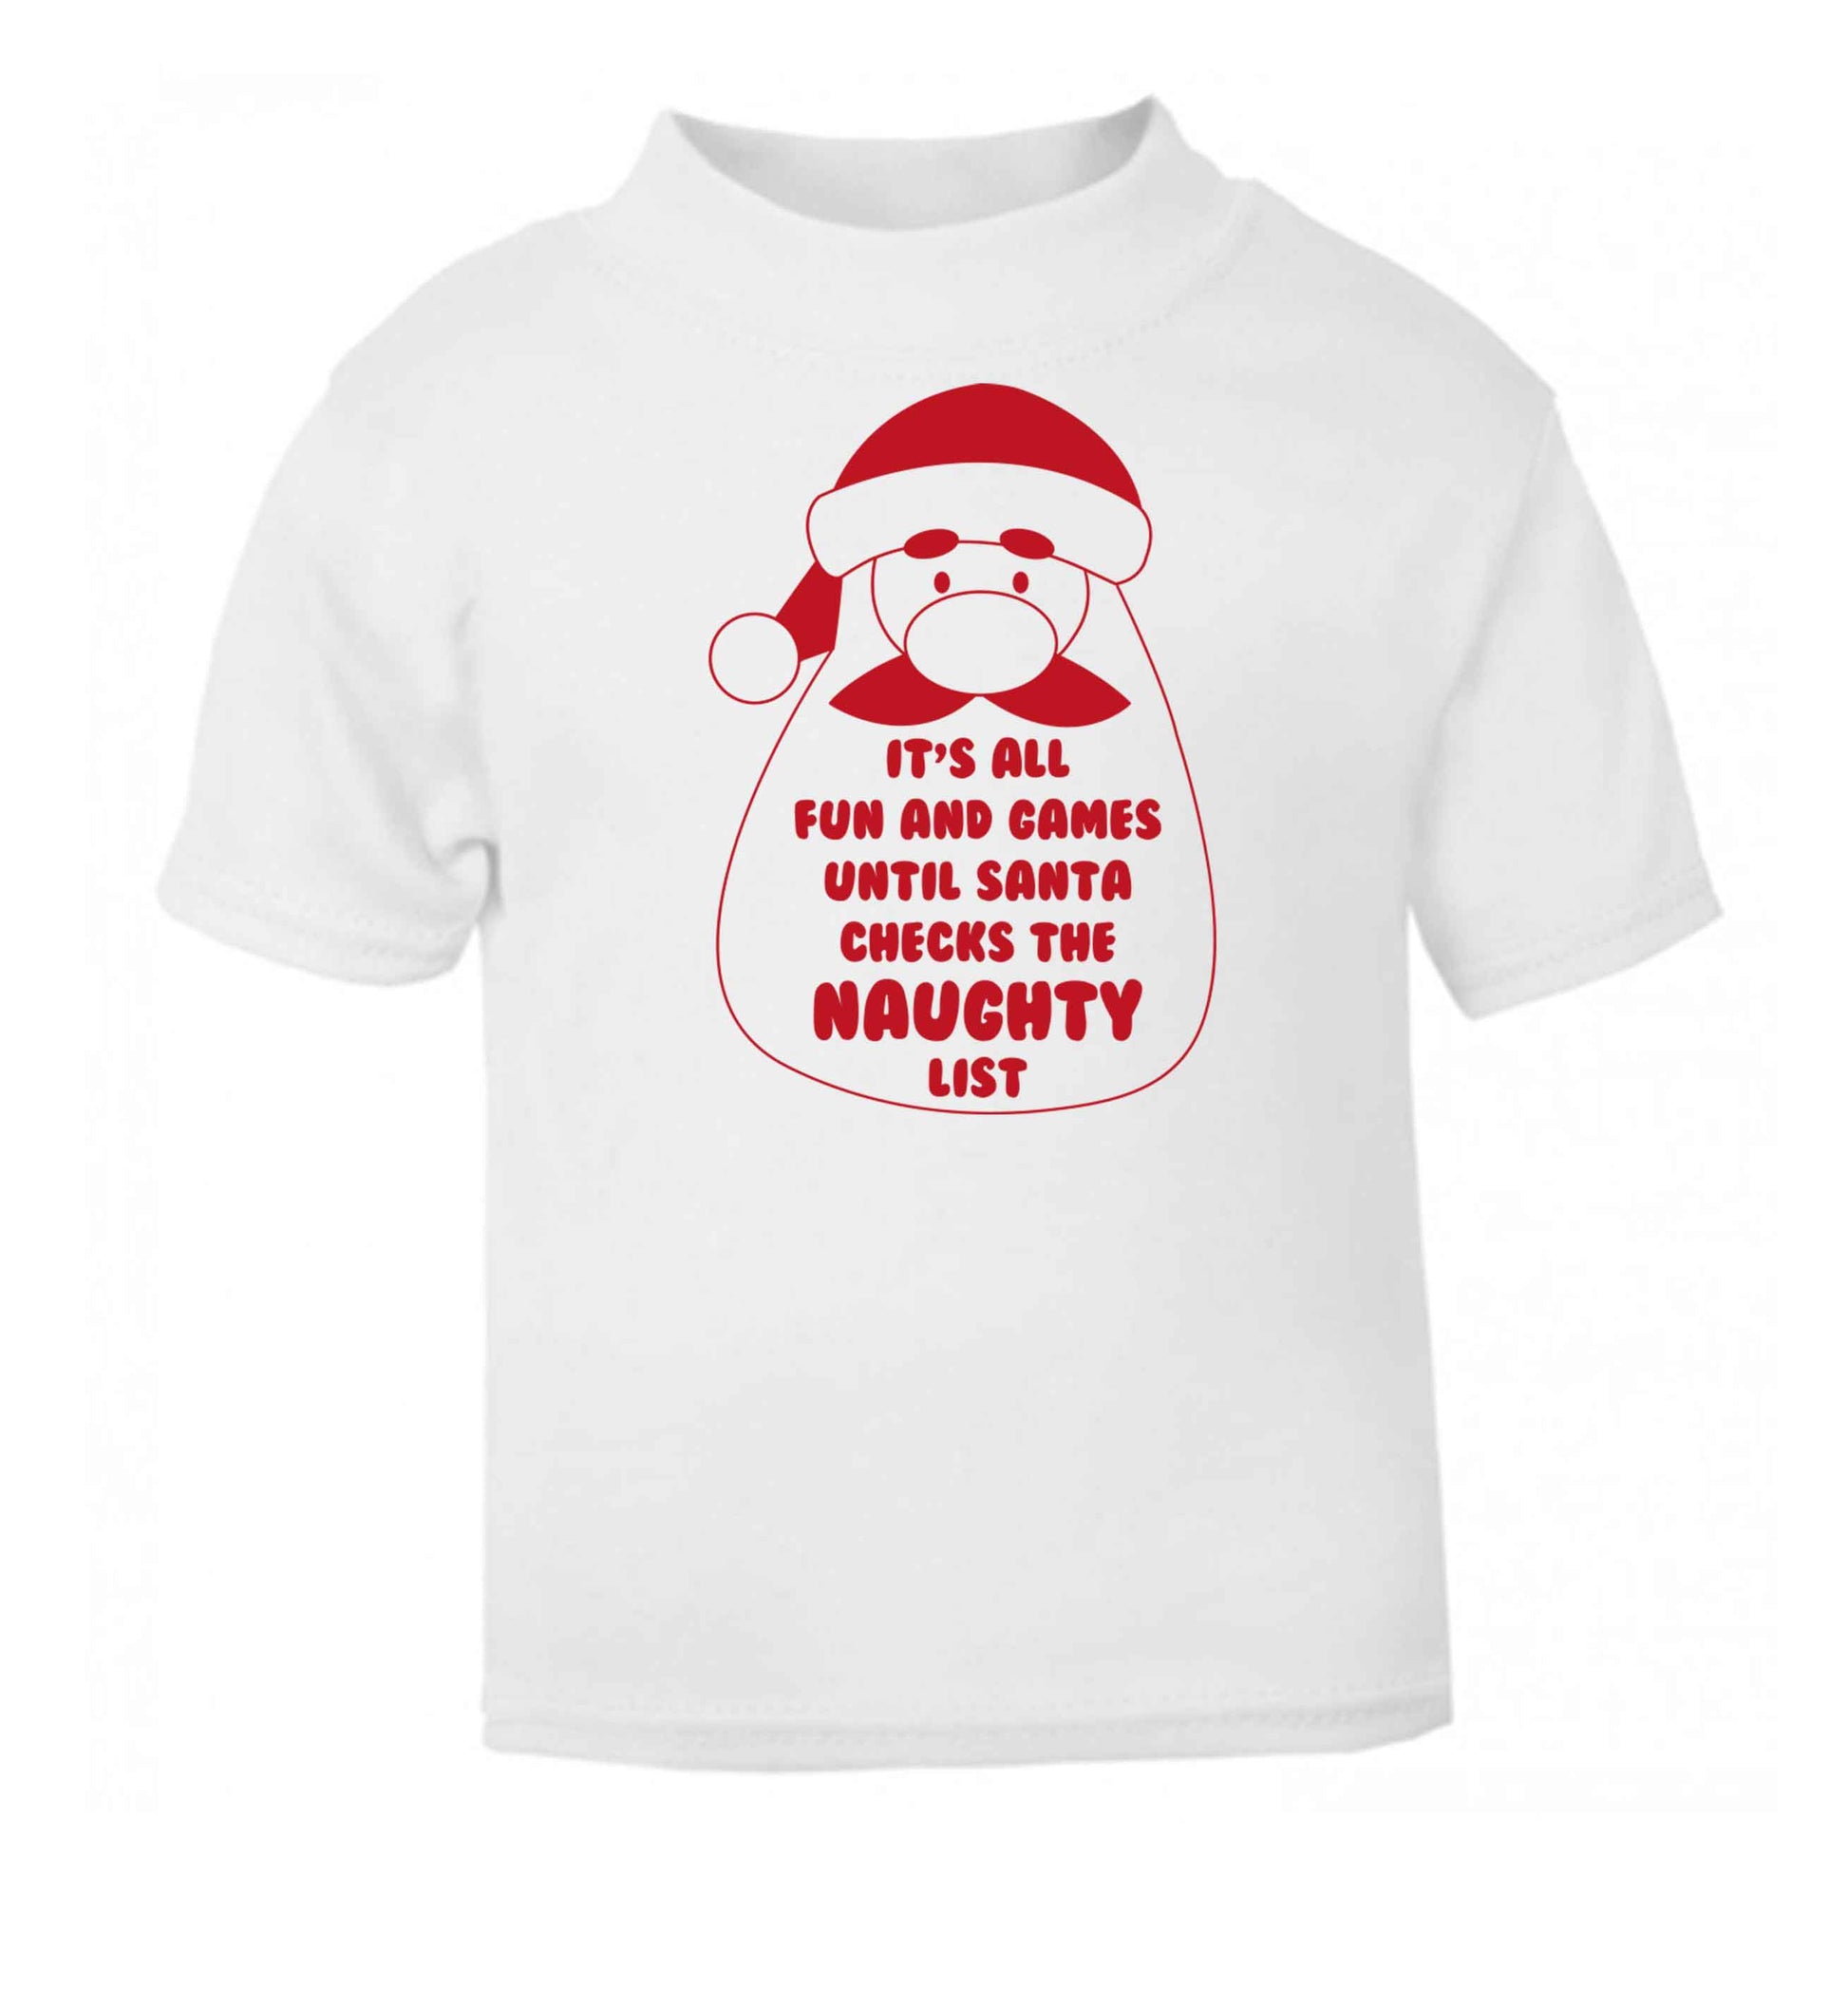 It's all fun and games until Santa checks the naughty list white baby toddler Tshirt 2 Years